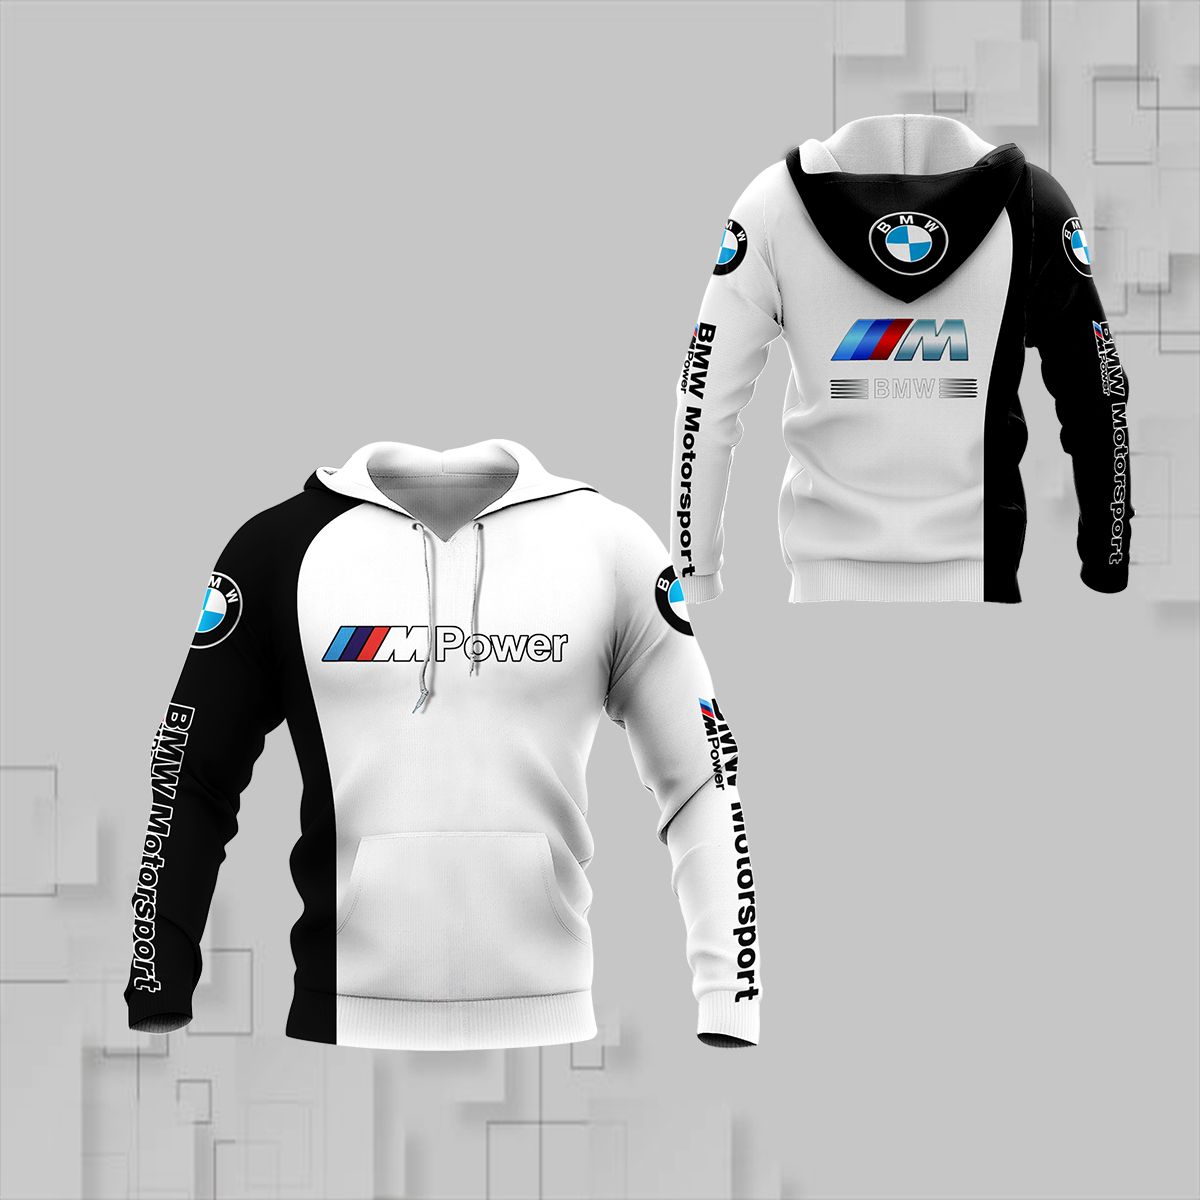 3D All Over Printed BMW Mpower BDA-HT Shirts Ver 1 (White)